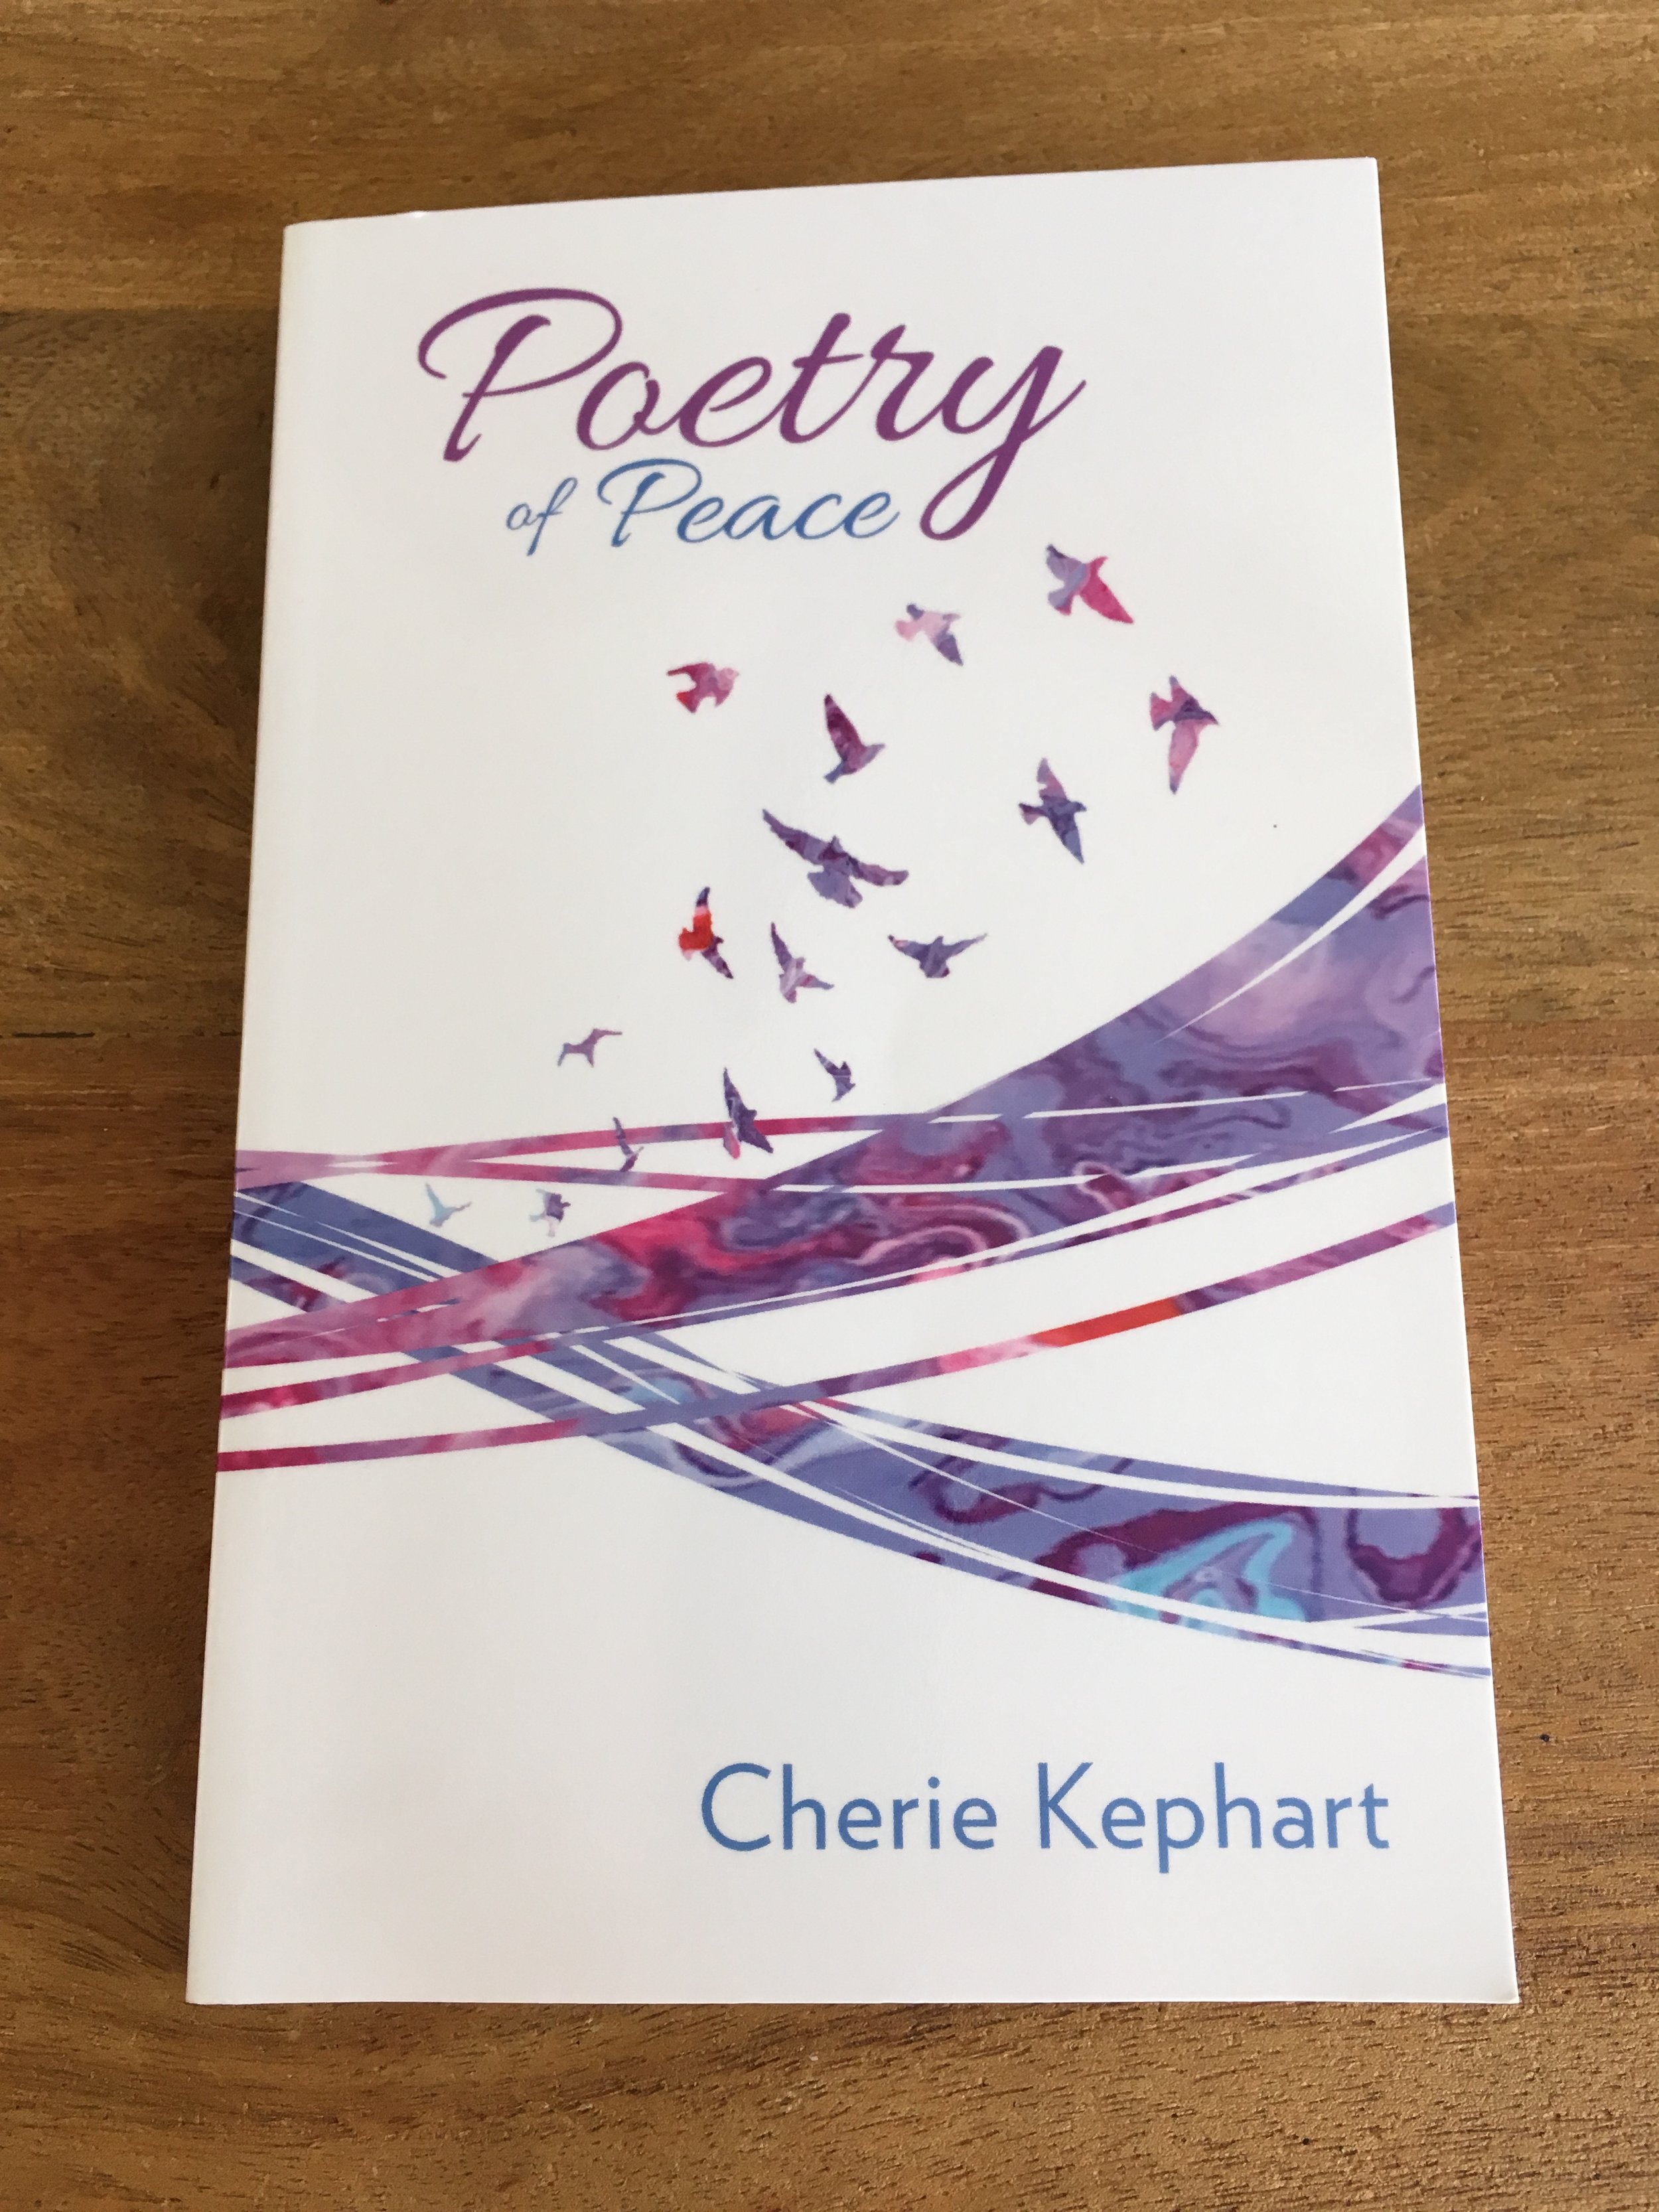 Poetry of Peace is Now Available!